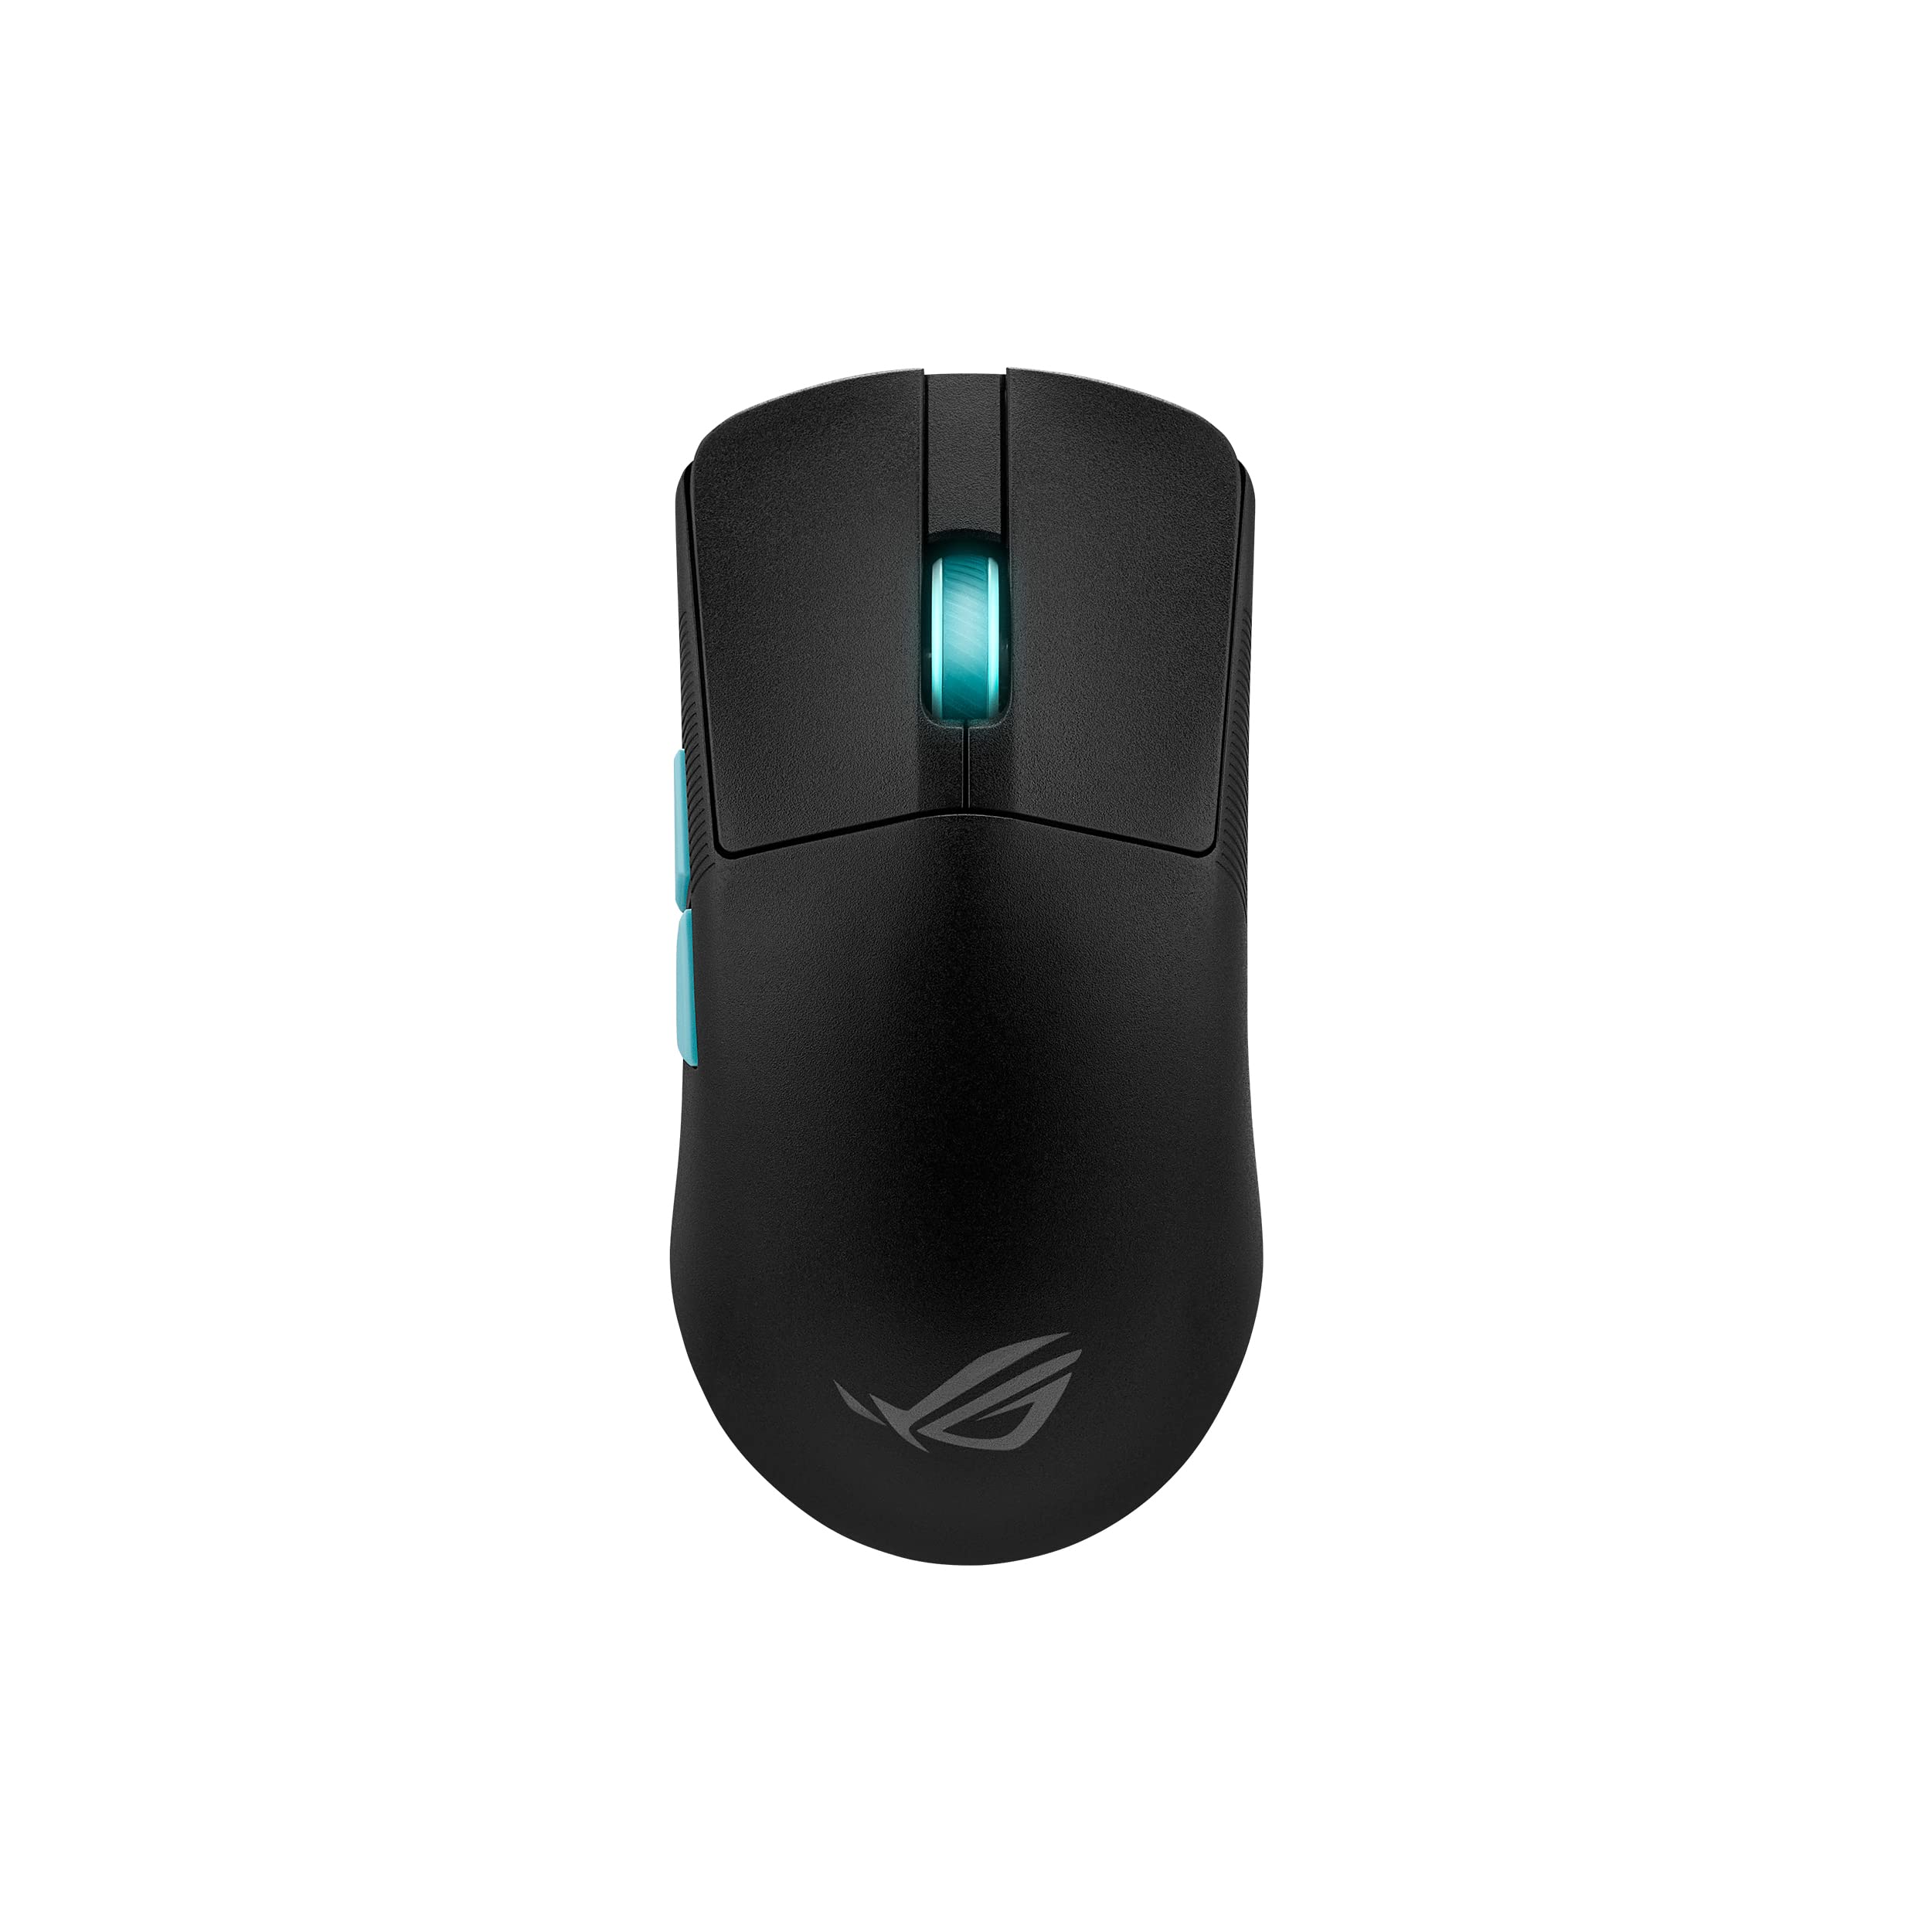 ROG Harpe Ace Aim Lab Edition Wireless Gaming Mouse (Black) $109 + Free Shipping